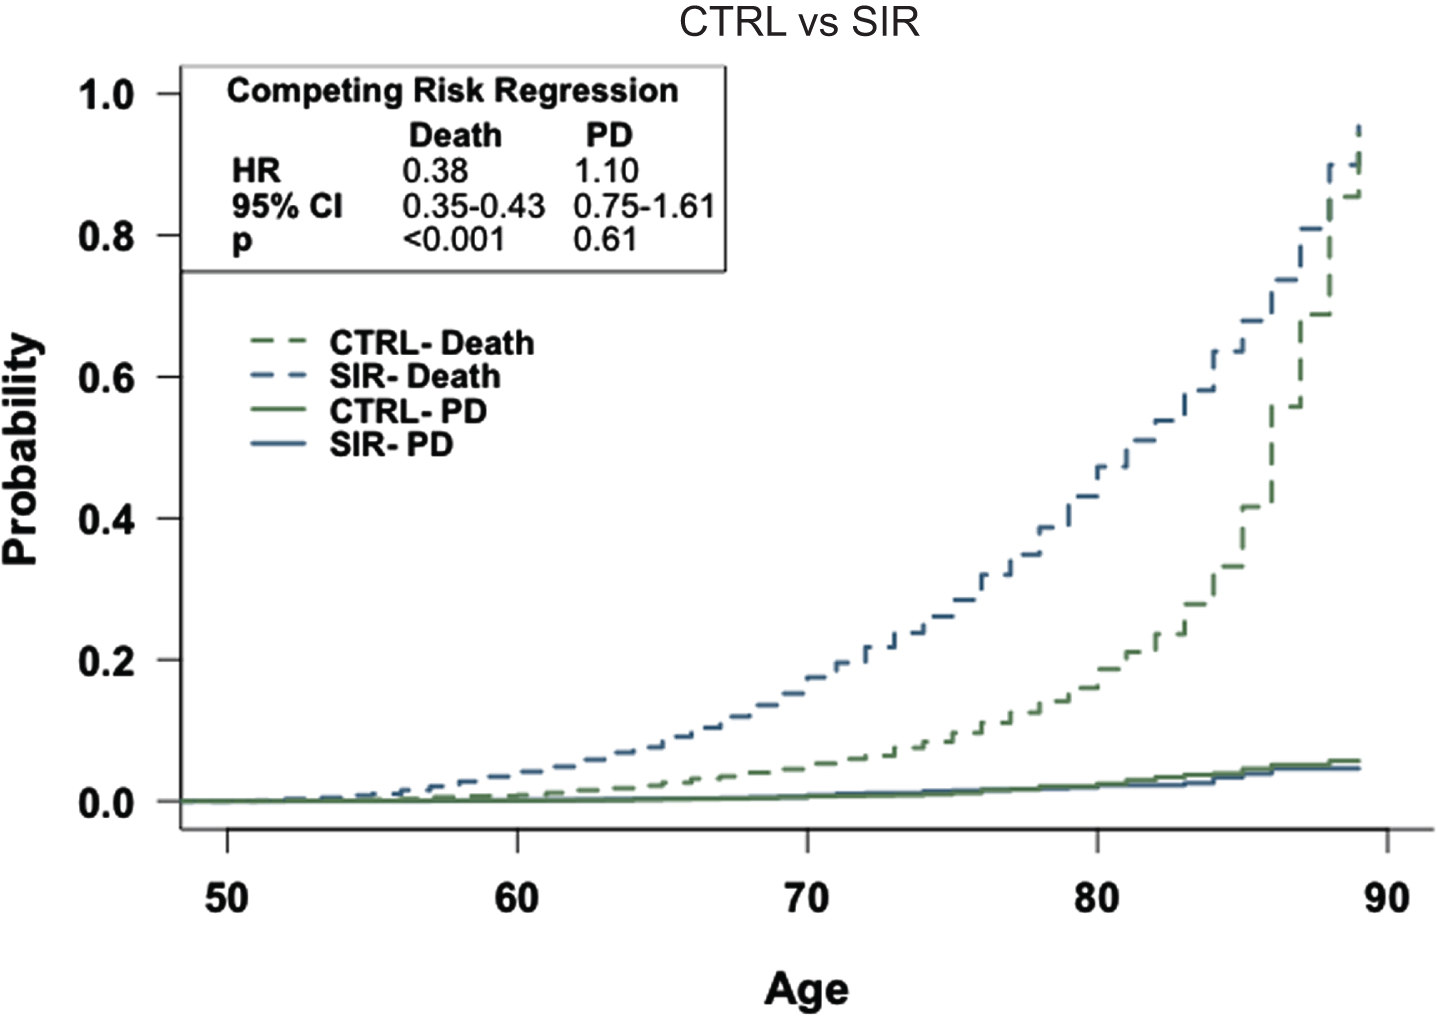 The general population has an equal risk of Parkinson’s disease compared to patients prescribed sirolimus. Competing risk regression analysis of PD and death between patients prescribed sirolimus or in the general population-like control. Patients in the general population-like control have no difference in risk of PD but a decreased risk of death. n = 4,358 patients/cohort *CRR, competing risk regression; HR, hazard ratio; CI, confidence interval.